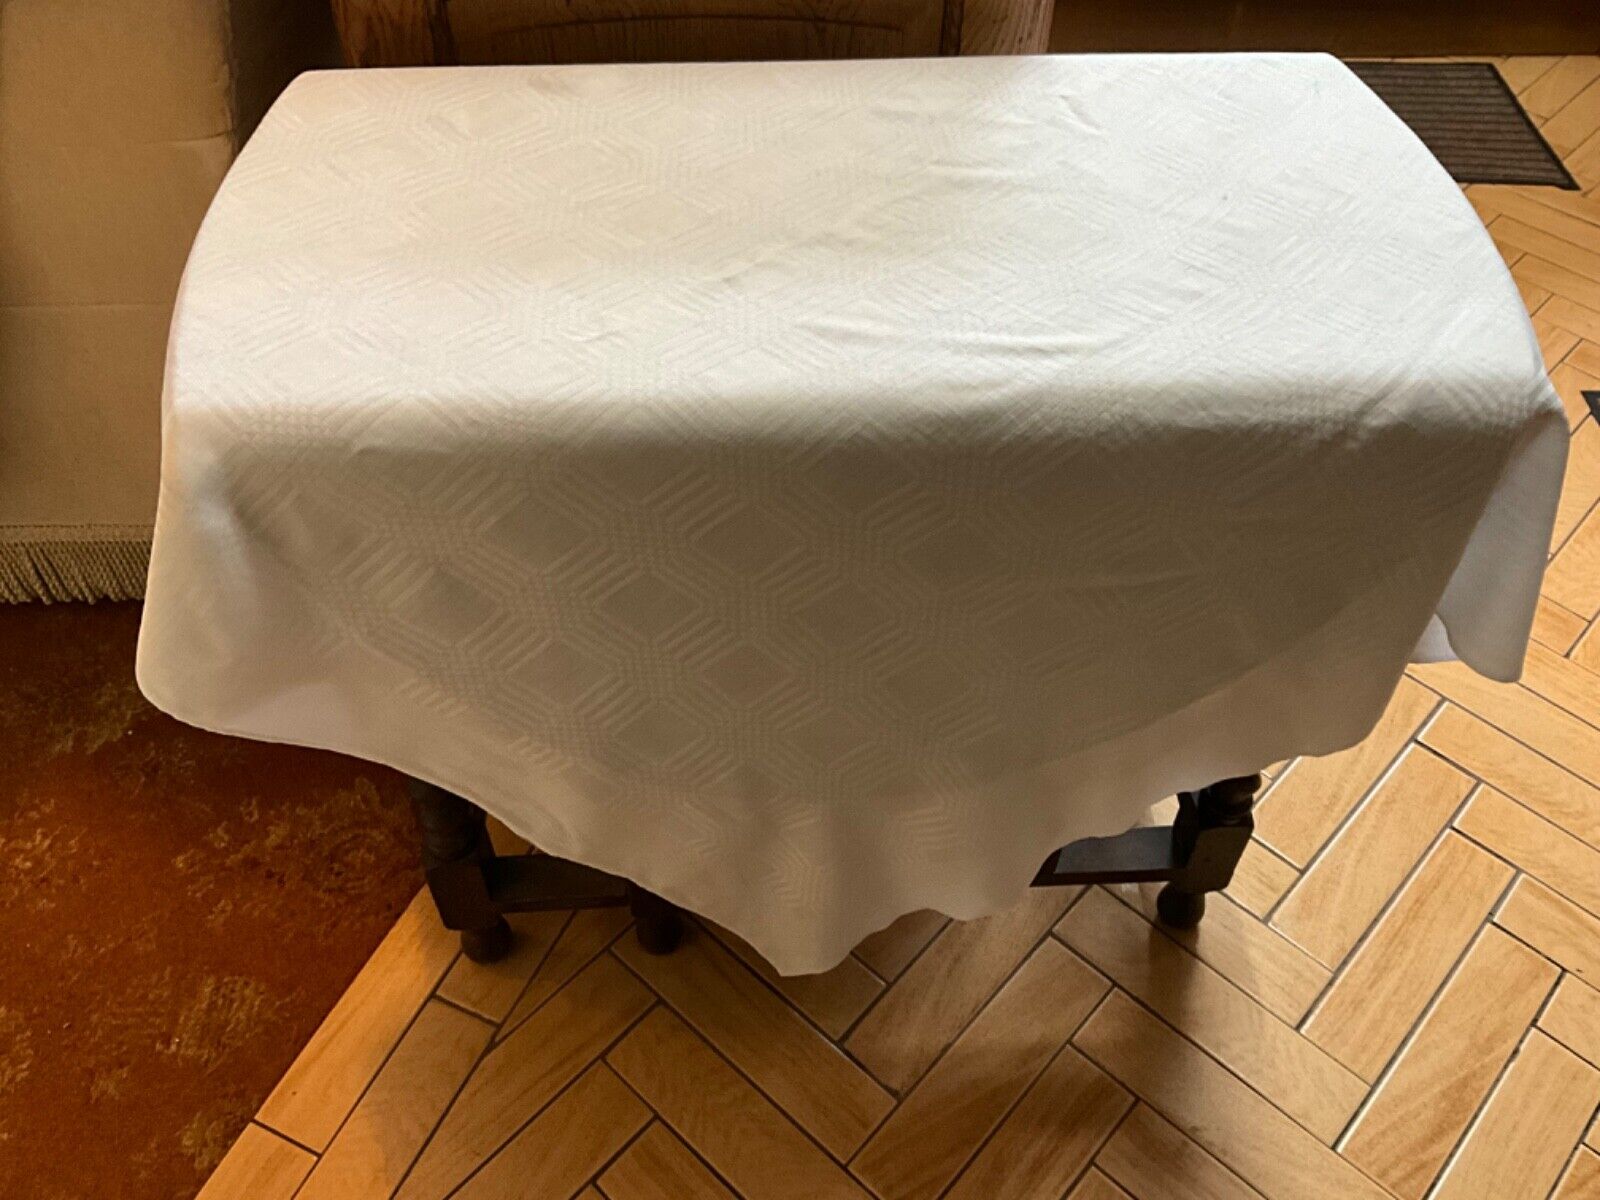 Vintage Damask Tablecloth with a chequered mesh design